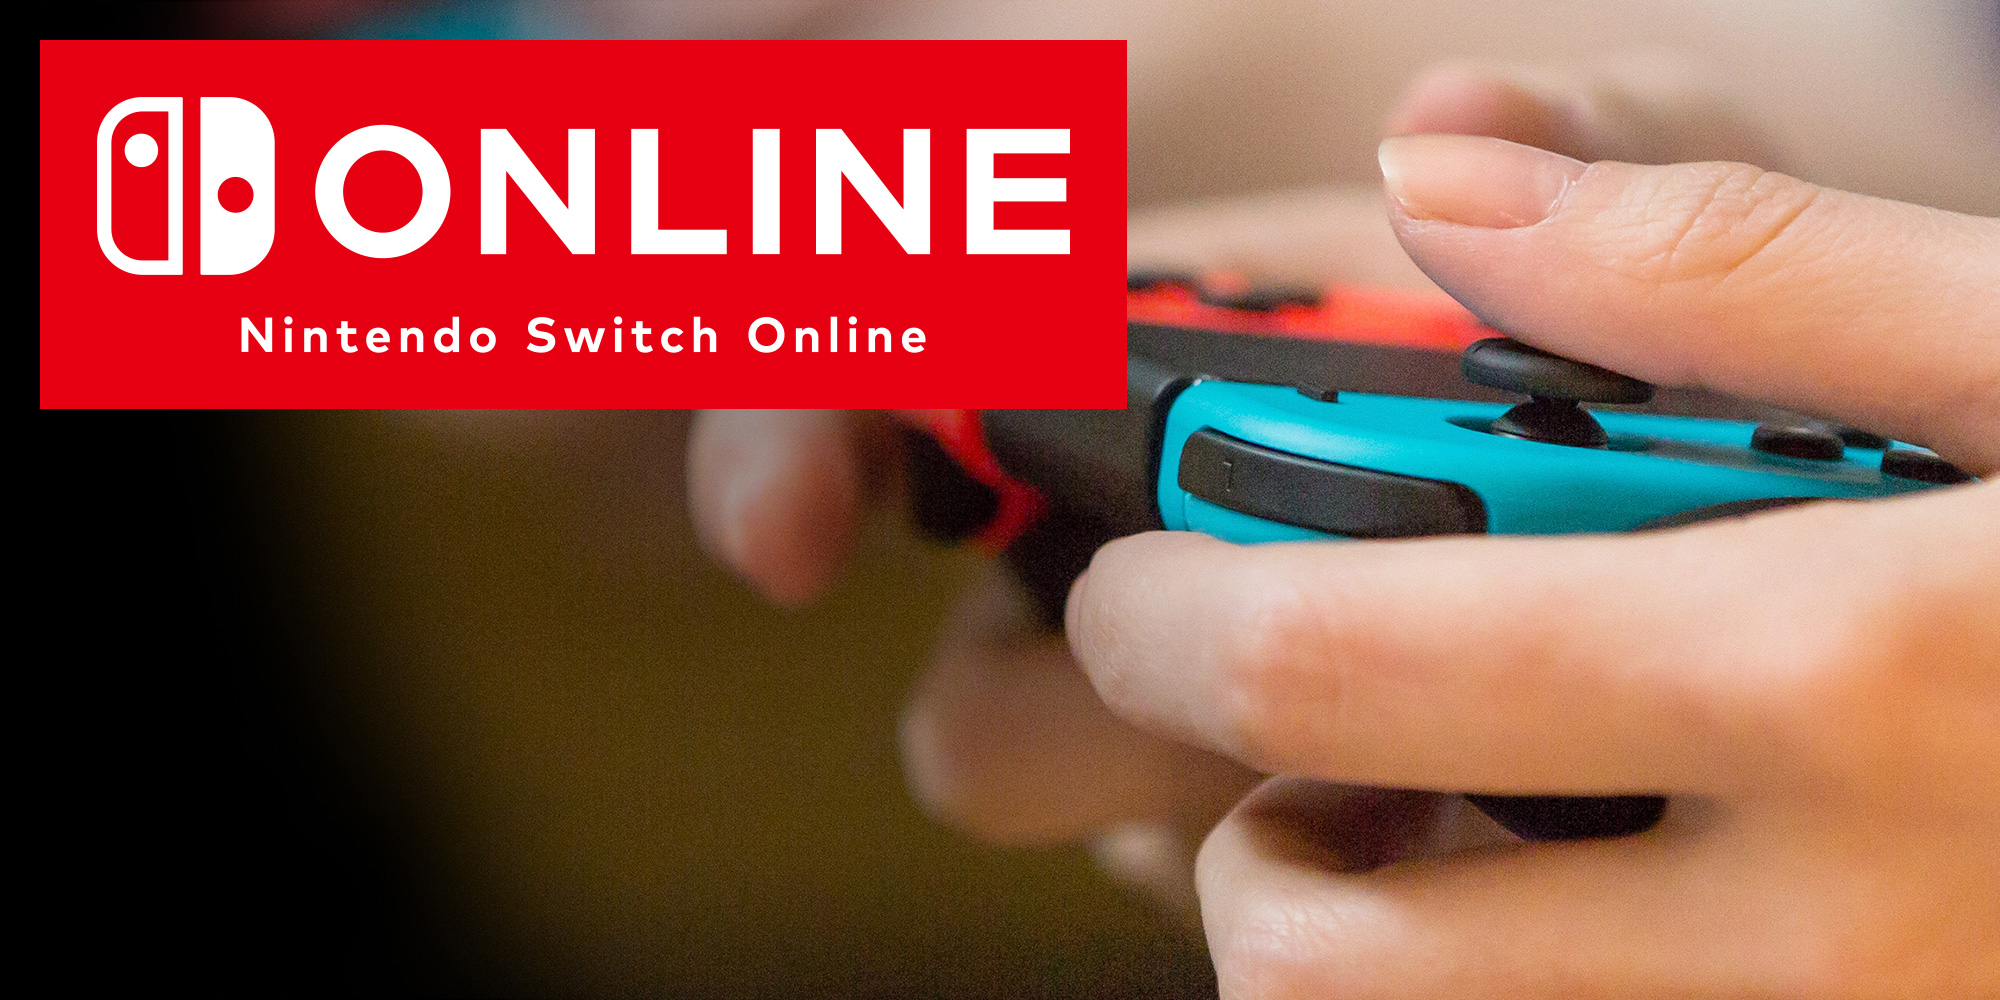 Nintendo Switch Online service launches September 18